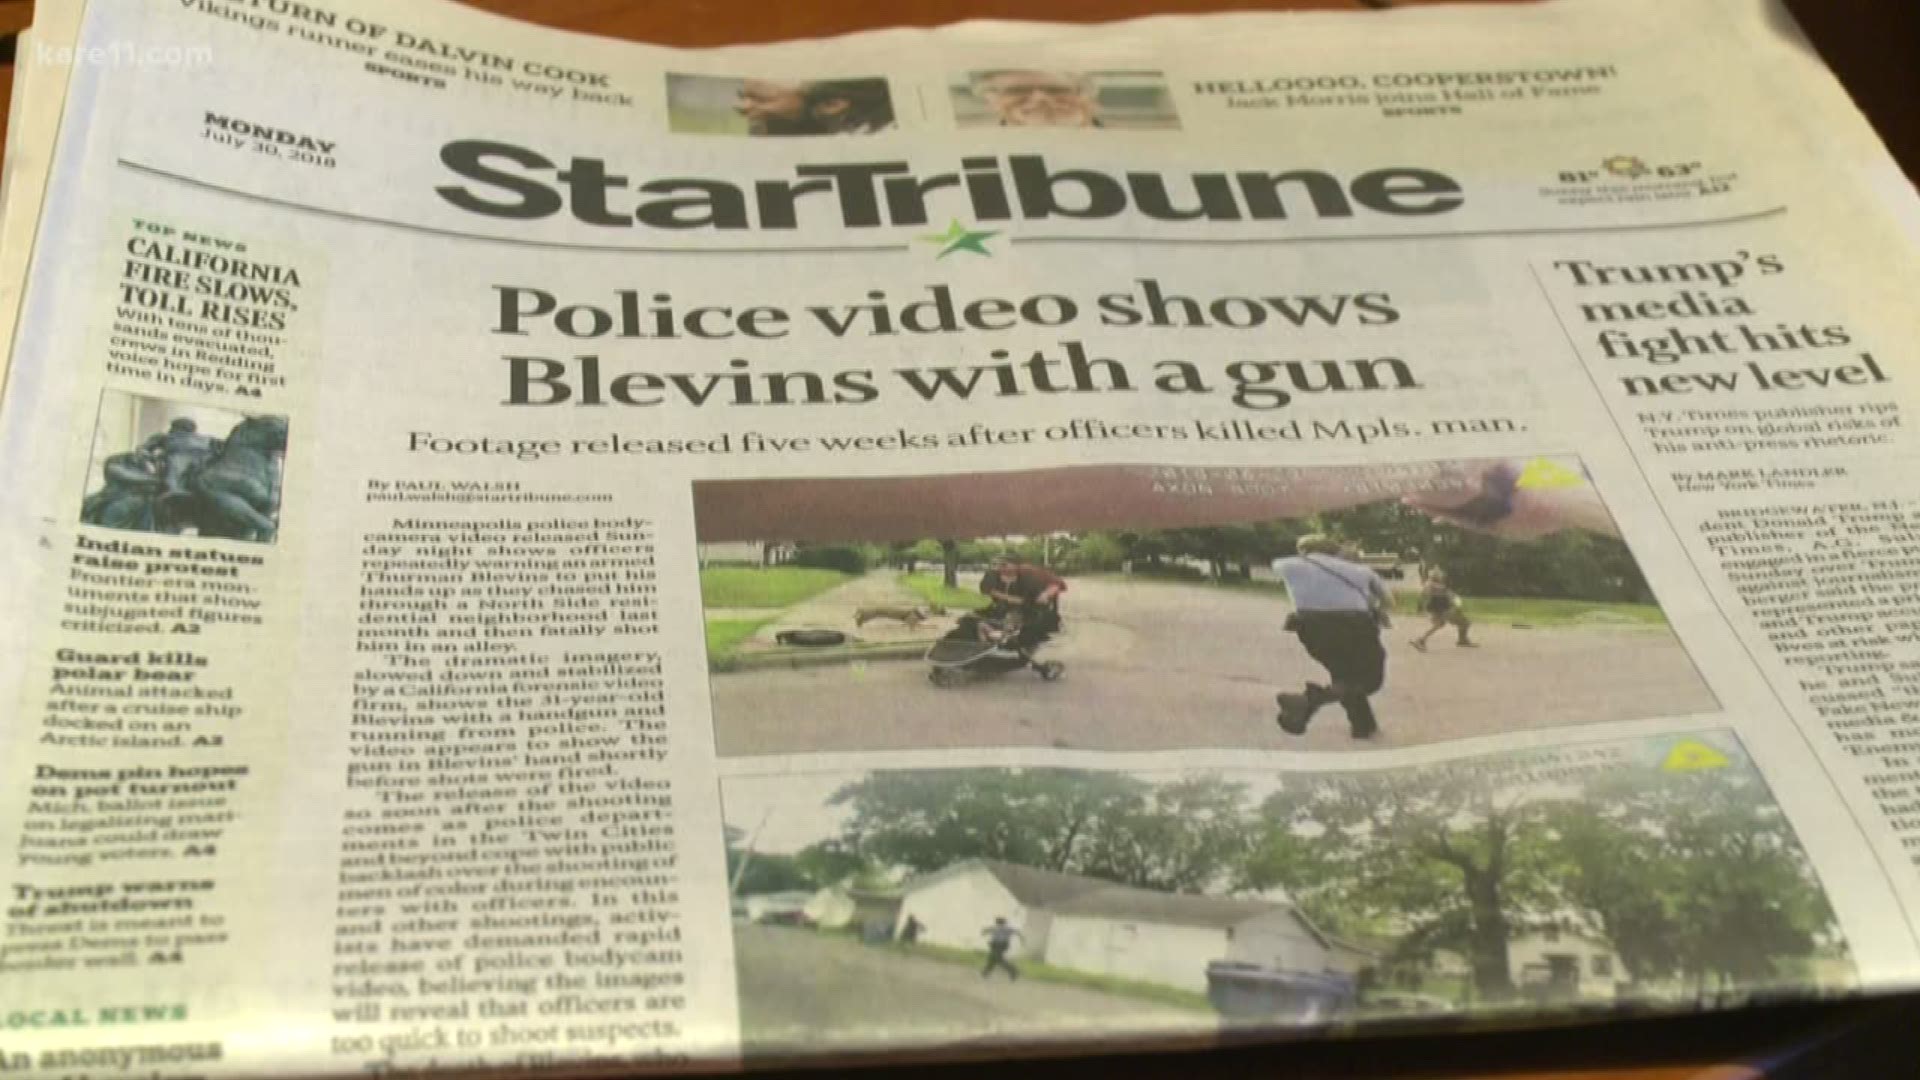 The media became a target during the Blevins news conference take over with various outlets getting called out for what activists say is unfair coverage of the deadly police shooting.